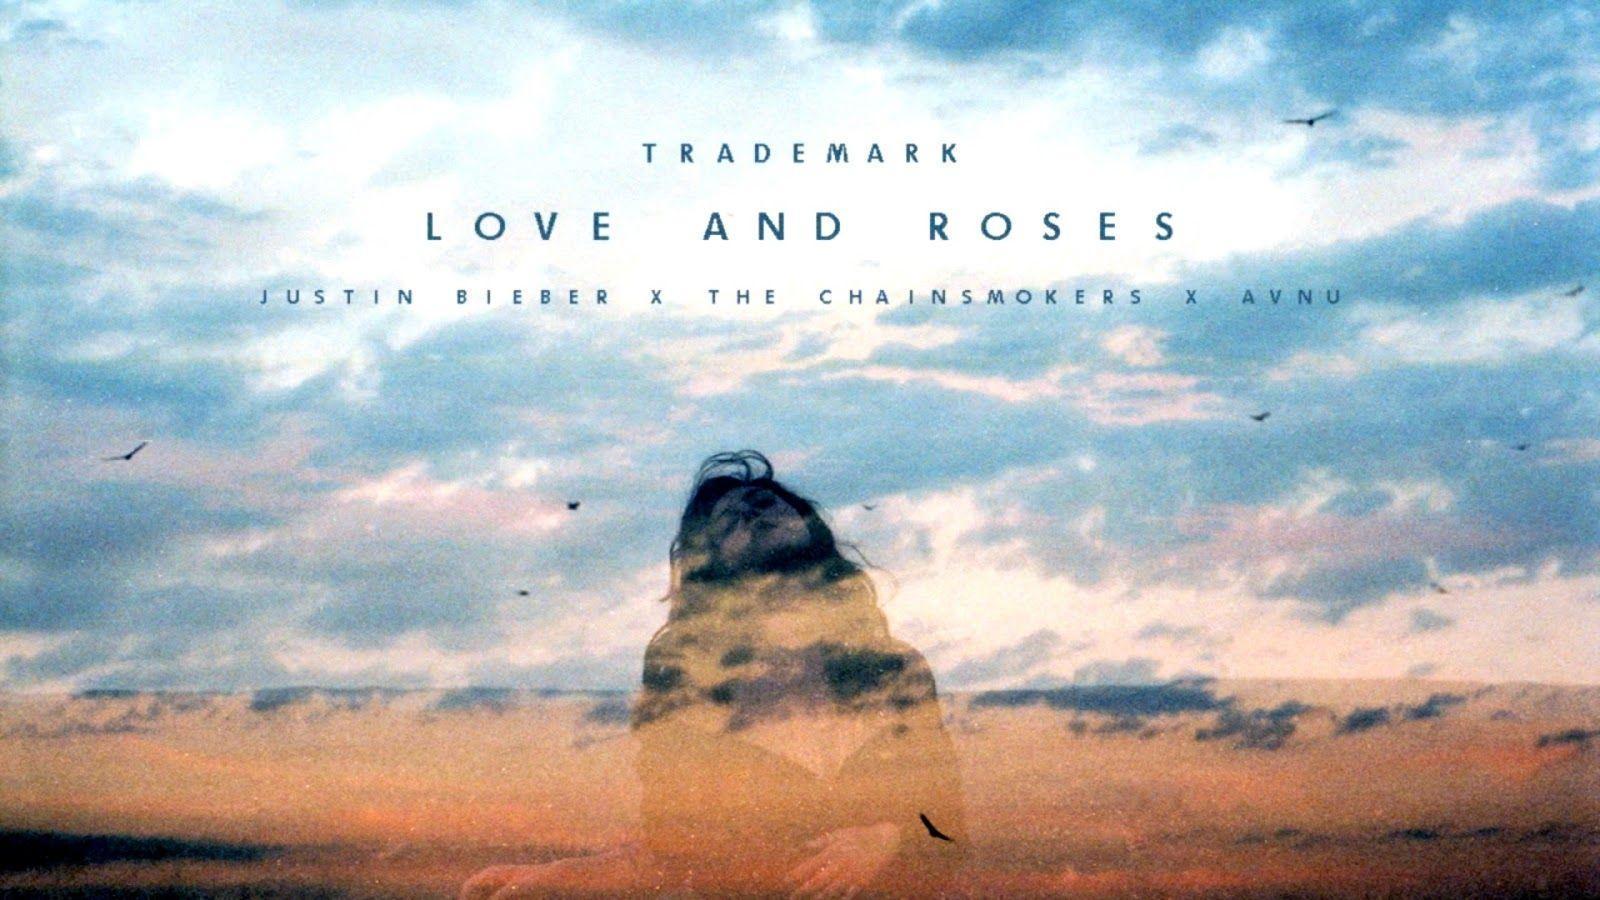 Trademark And Roses Justin Bieber x The Chainsmokers x